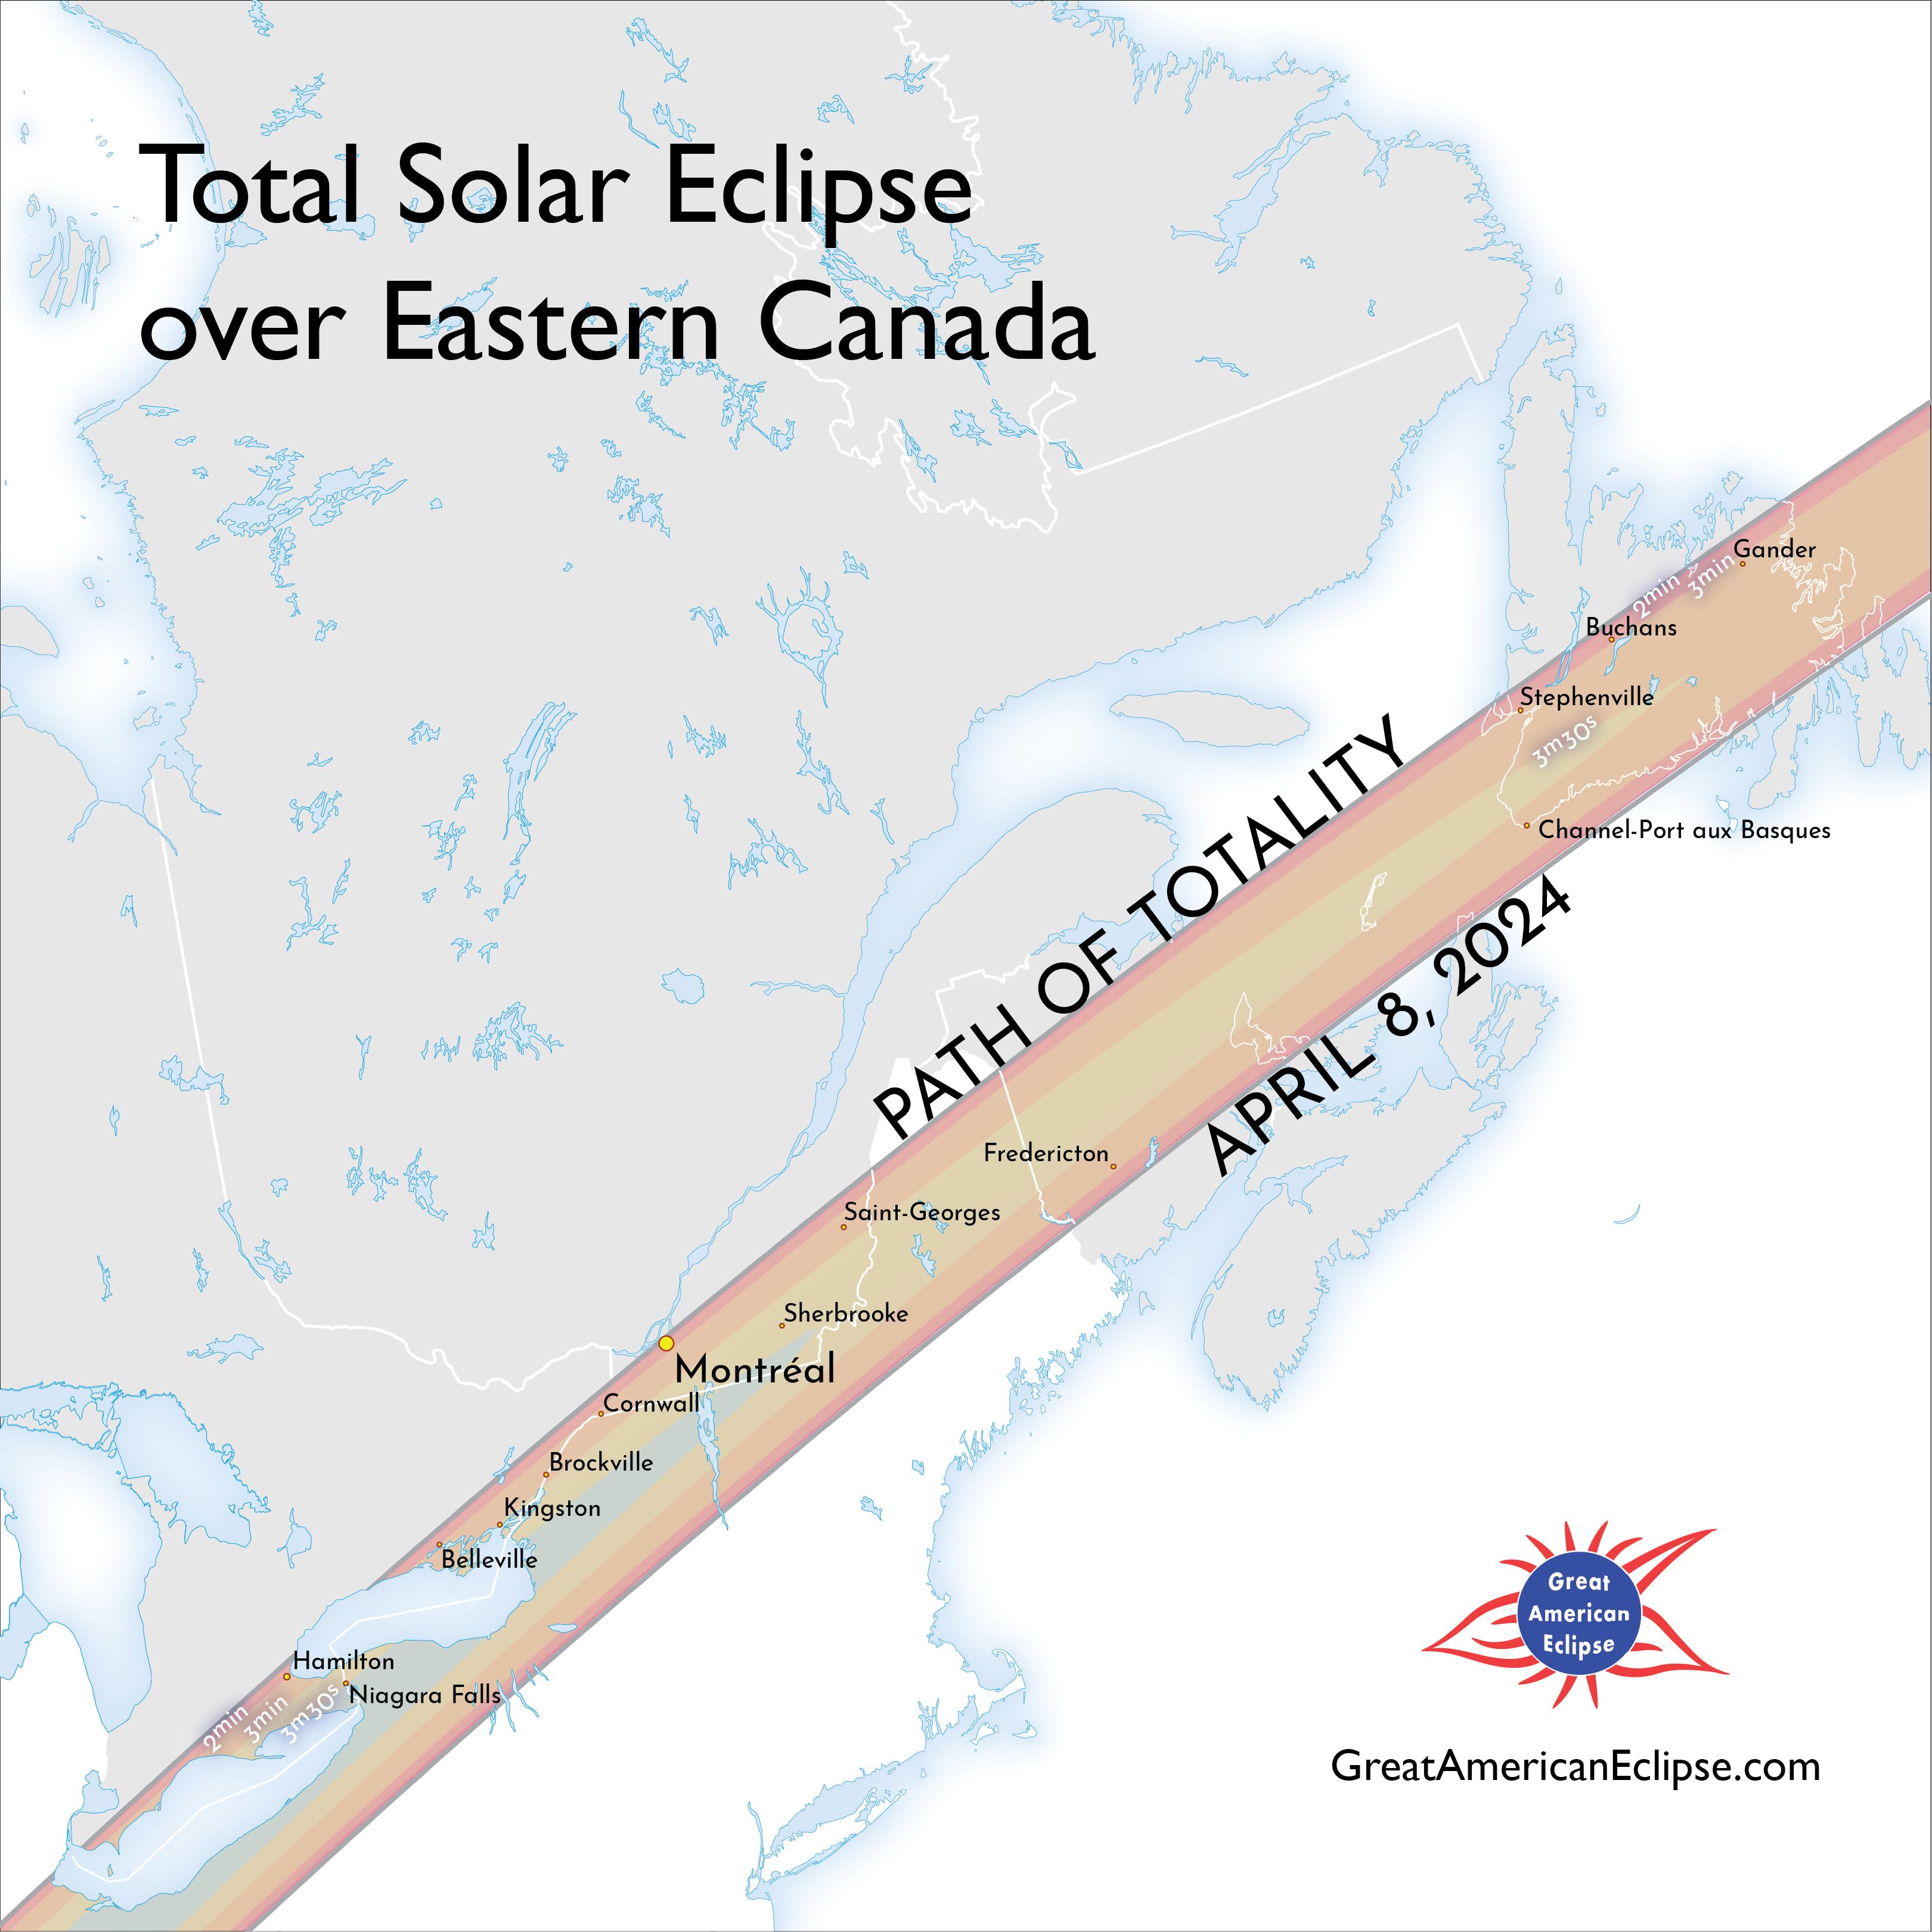 a map over eastern canada showing the path of eclipse totality.